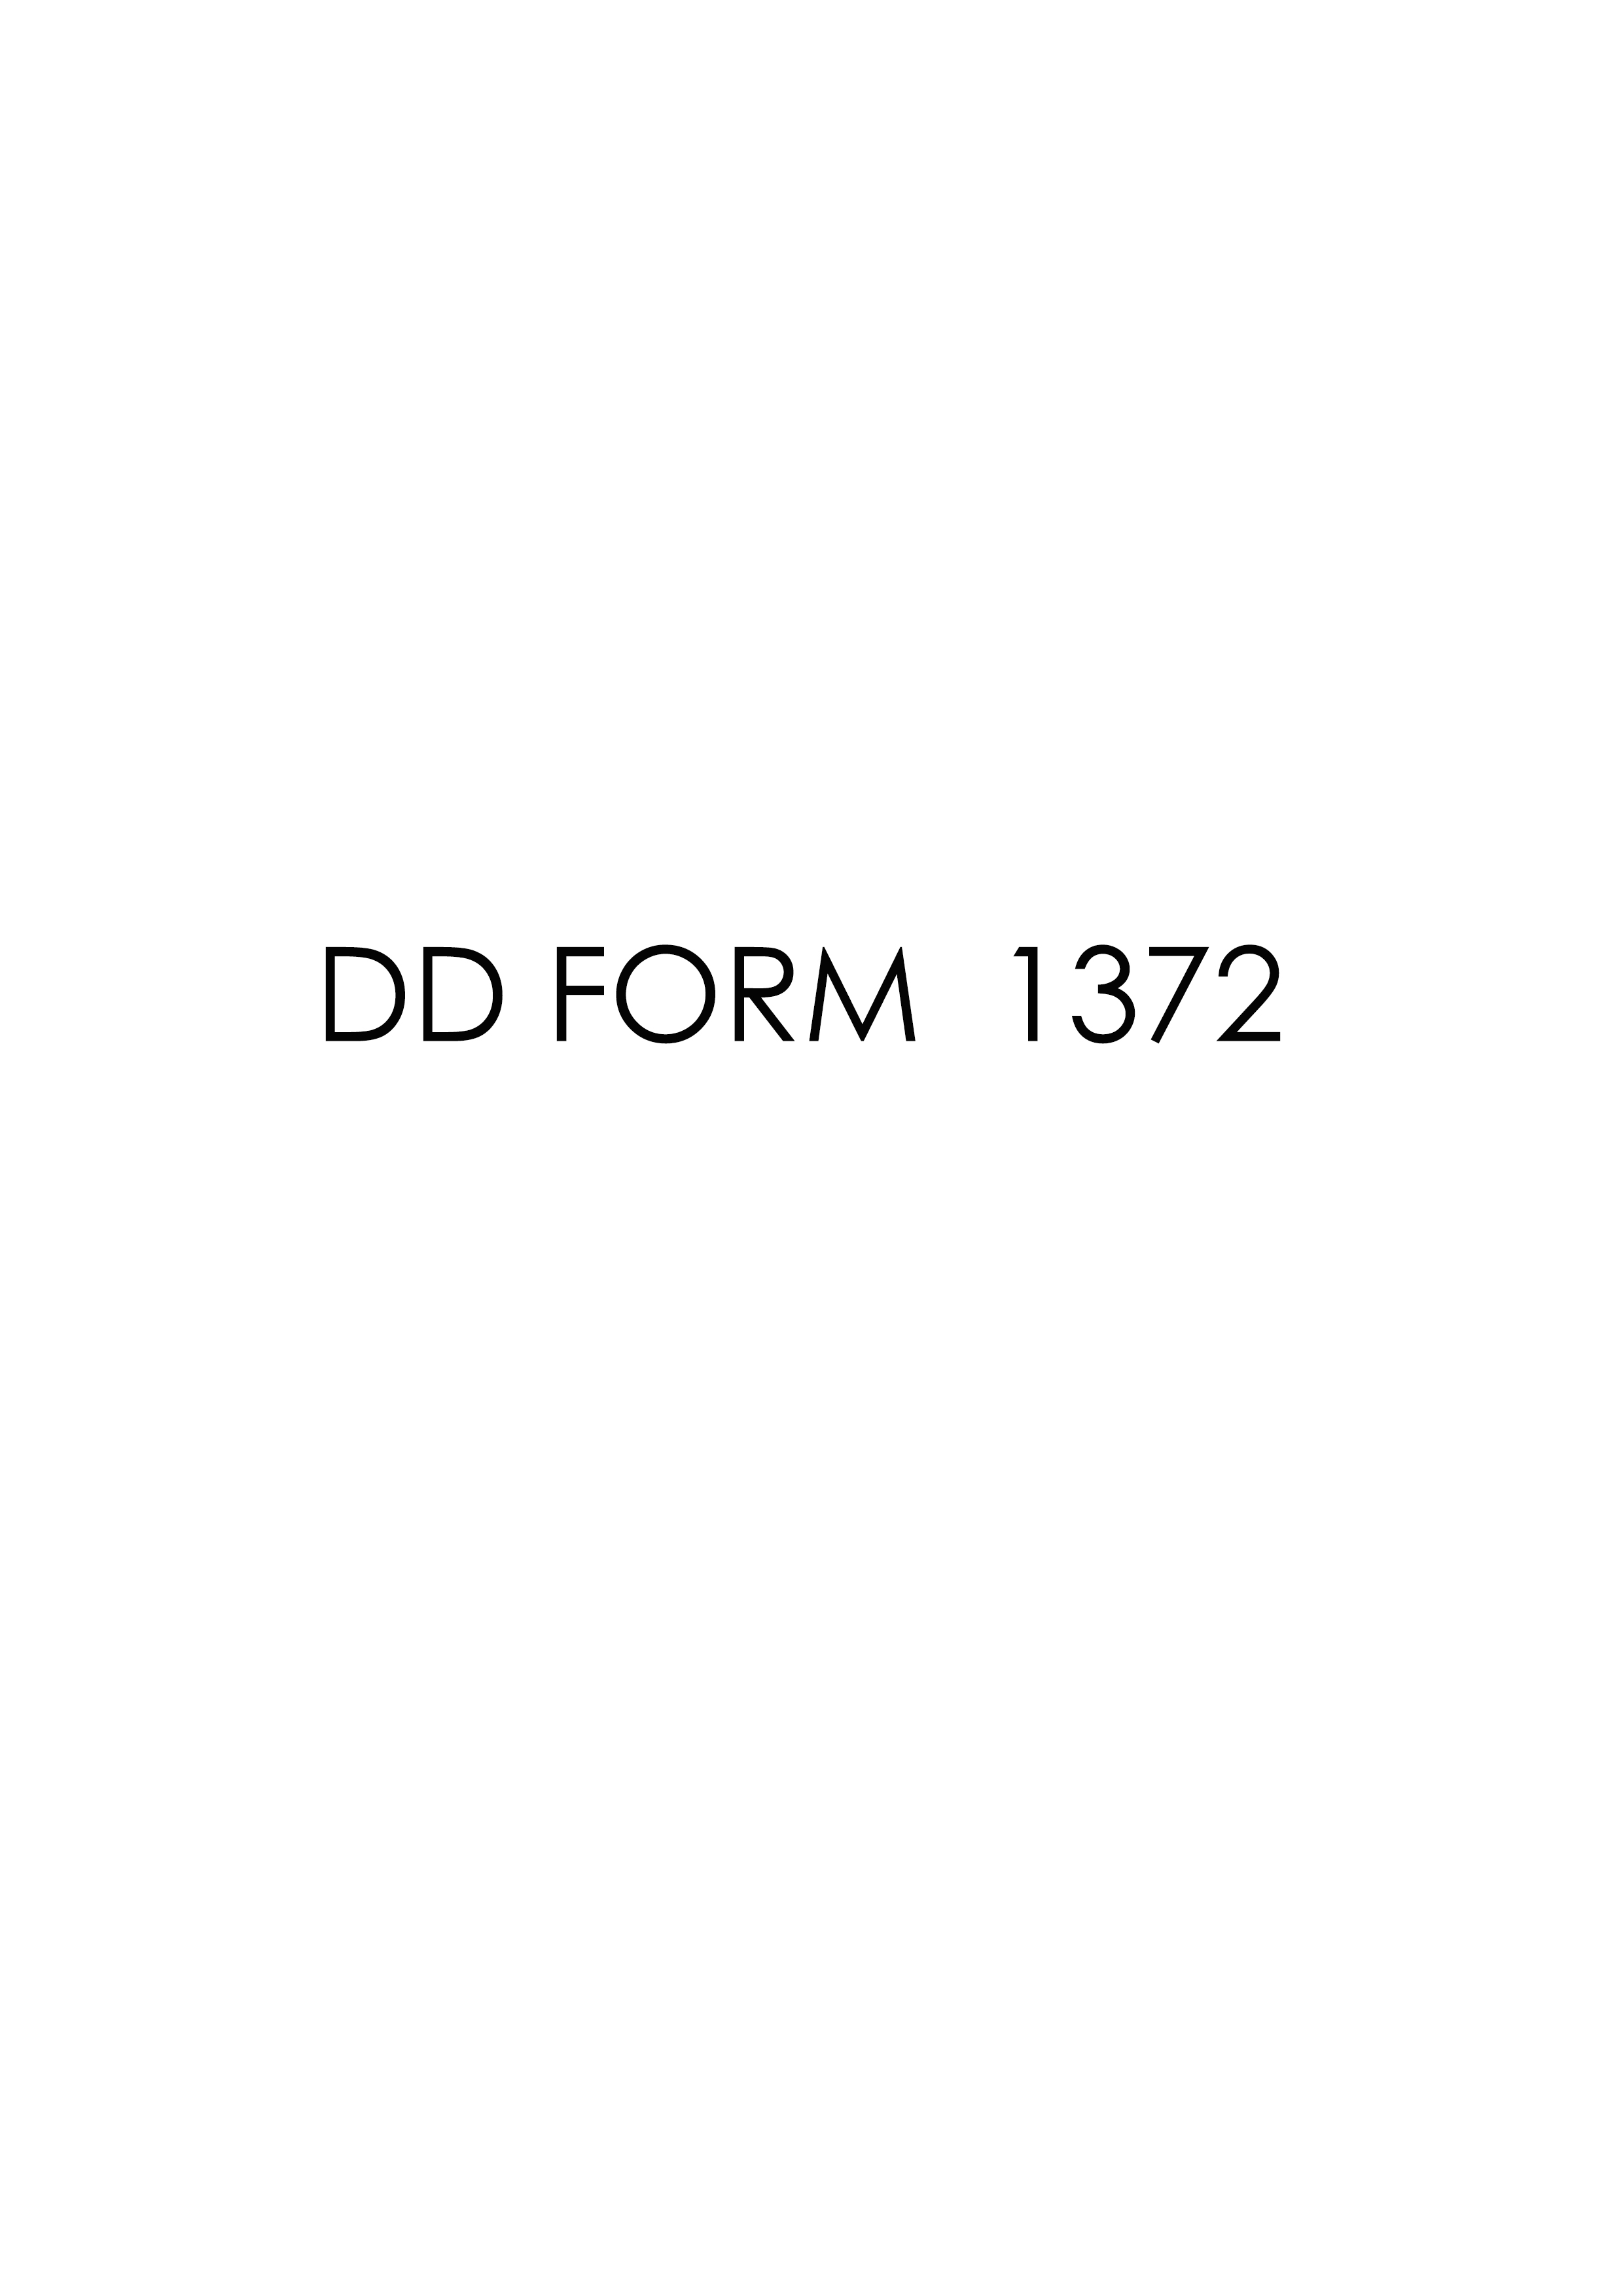 Download Fillable dd Form 1372